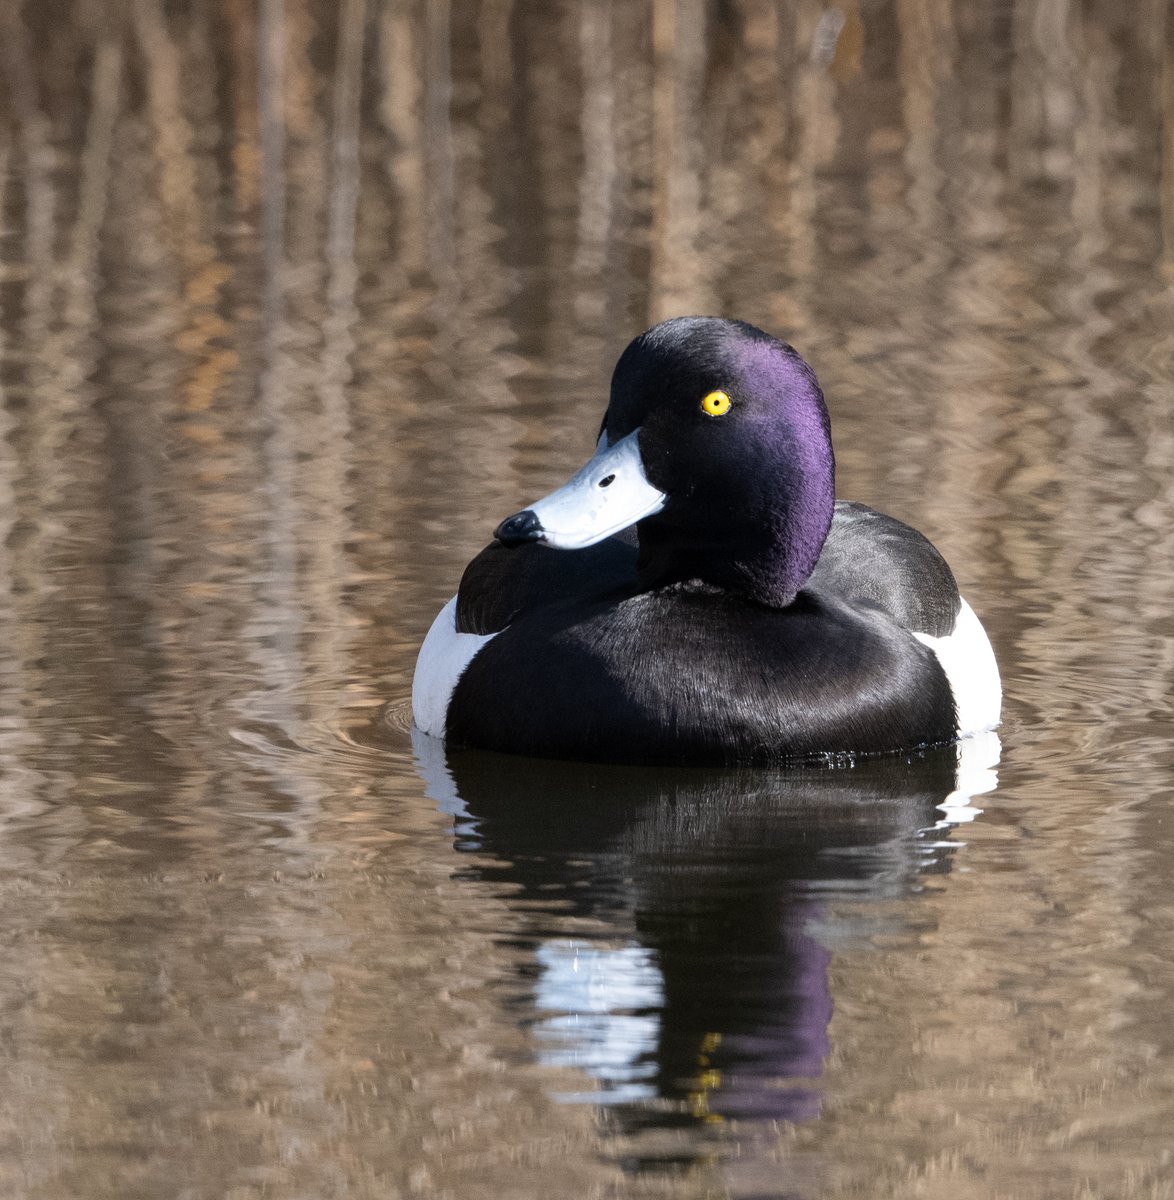 Bright sun bringing out the colours on Tufted Duck today at RSPB Old Moor. Also, 8 Buzzard, Marsh Harrier, 2 Sparrowhawk, 2 Kestrel, 6 Goldeneye, 4 Bearded Tit, 4 Lesser Redpoll and 5 singing Cetti's @Barnsleybsg @DonnyBirding @RSPB_OldMoor